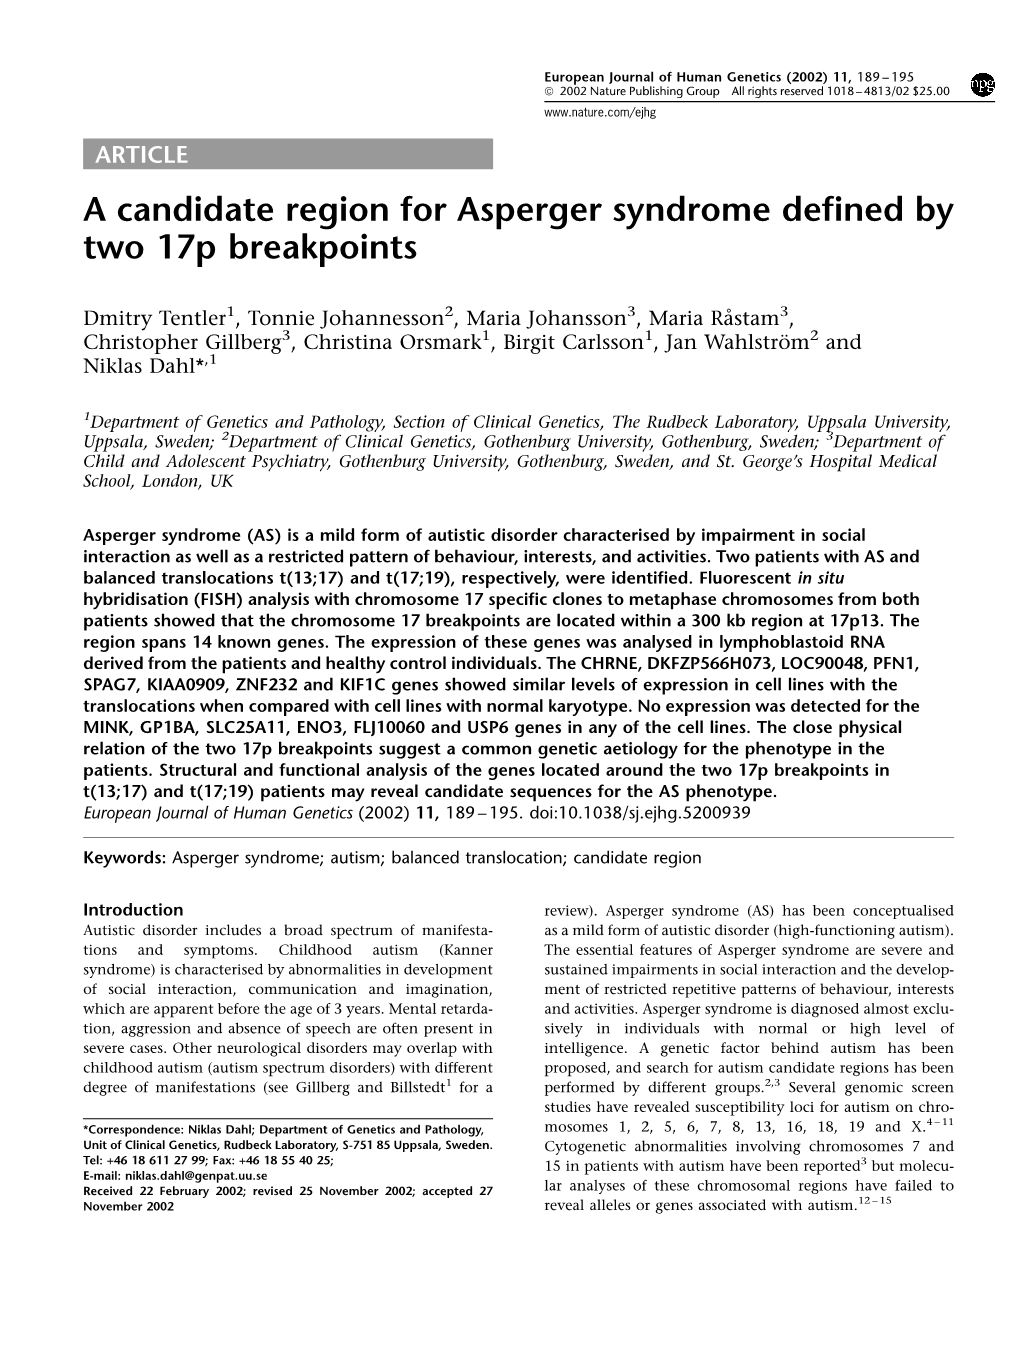 A Candidate Region for Asperger Syndrome Defined by Two 17P